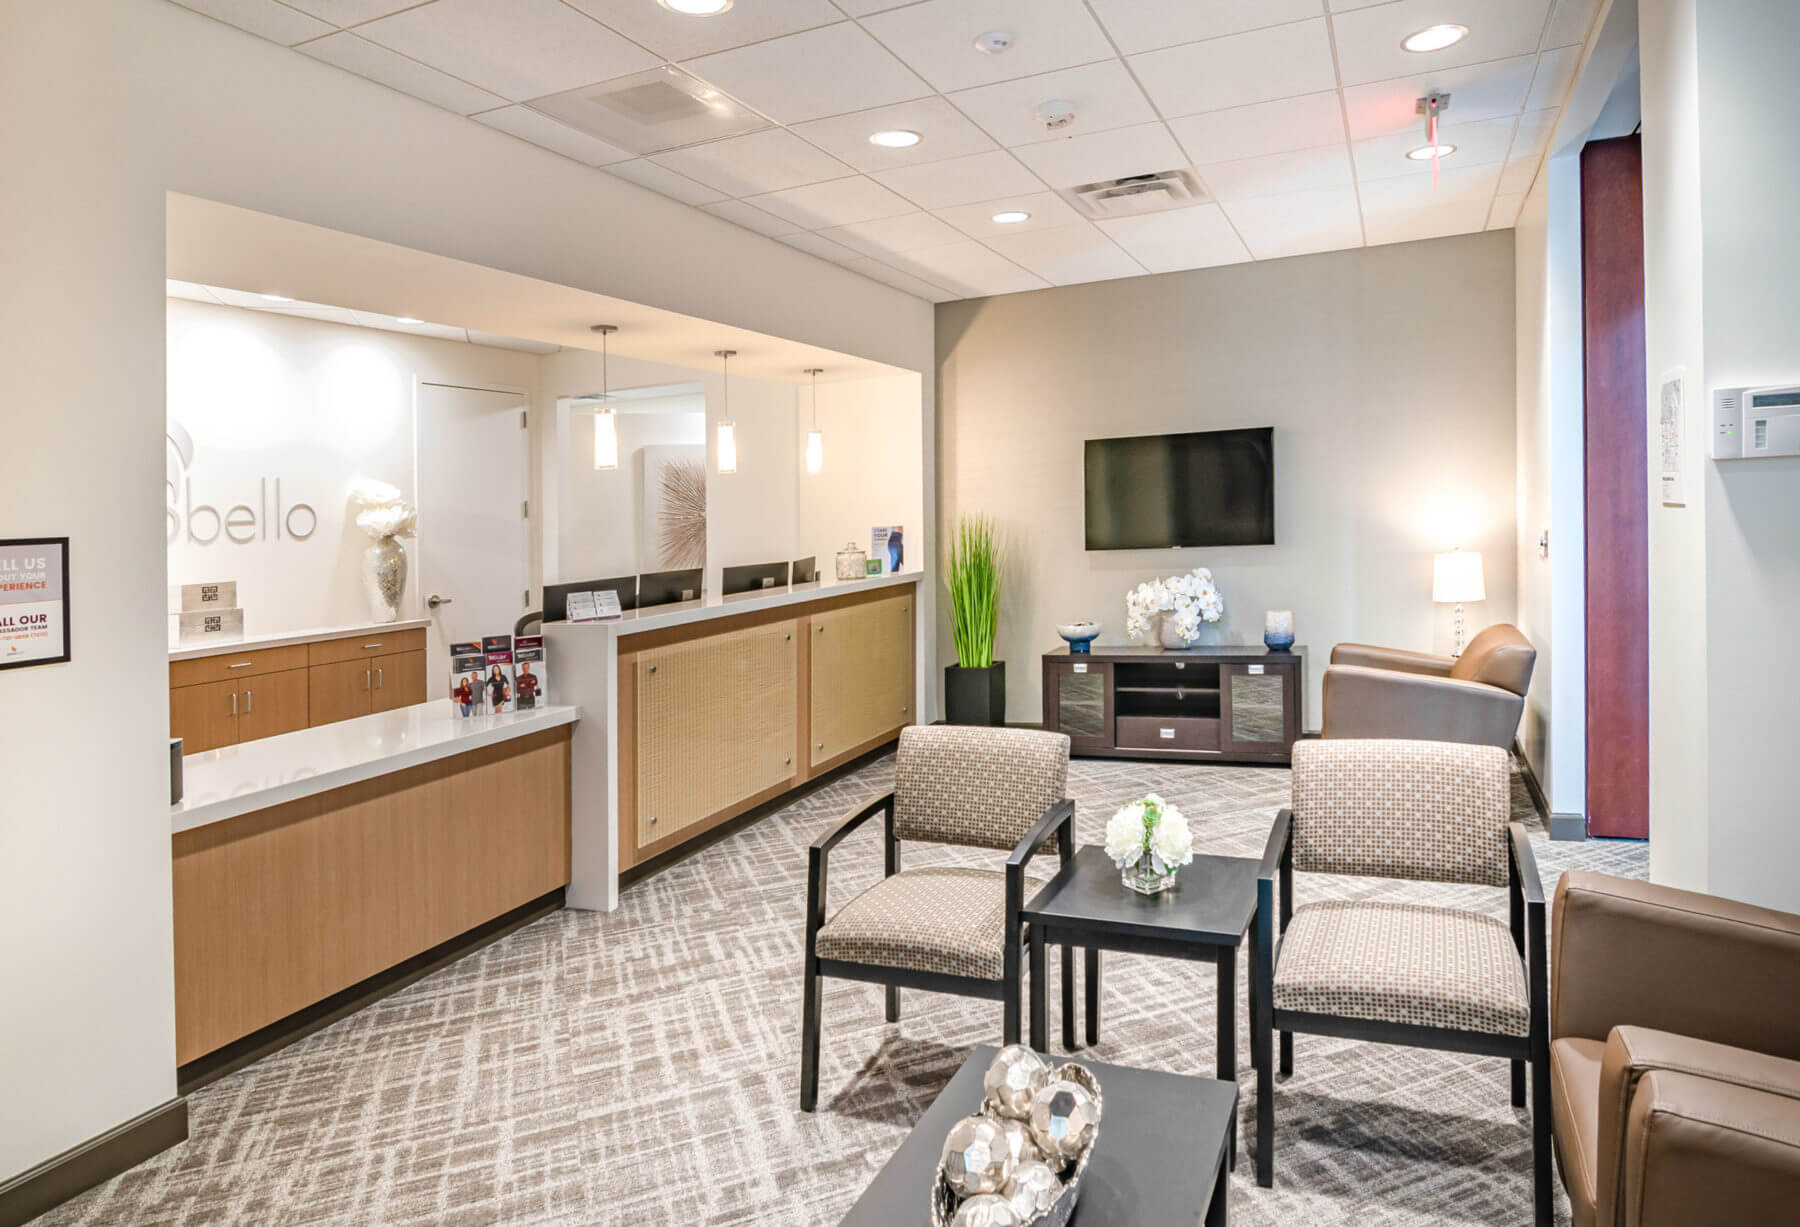 The comfortable waiting room for liposuction and body contouring patients in our Sono Bello Raleigh, NC location.